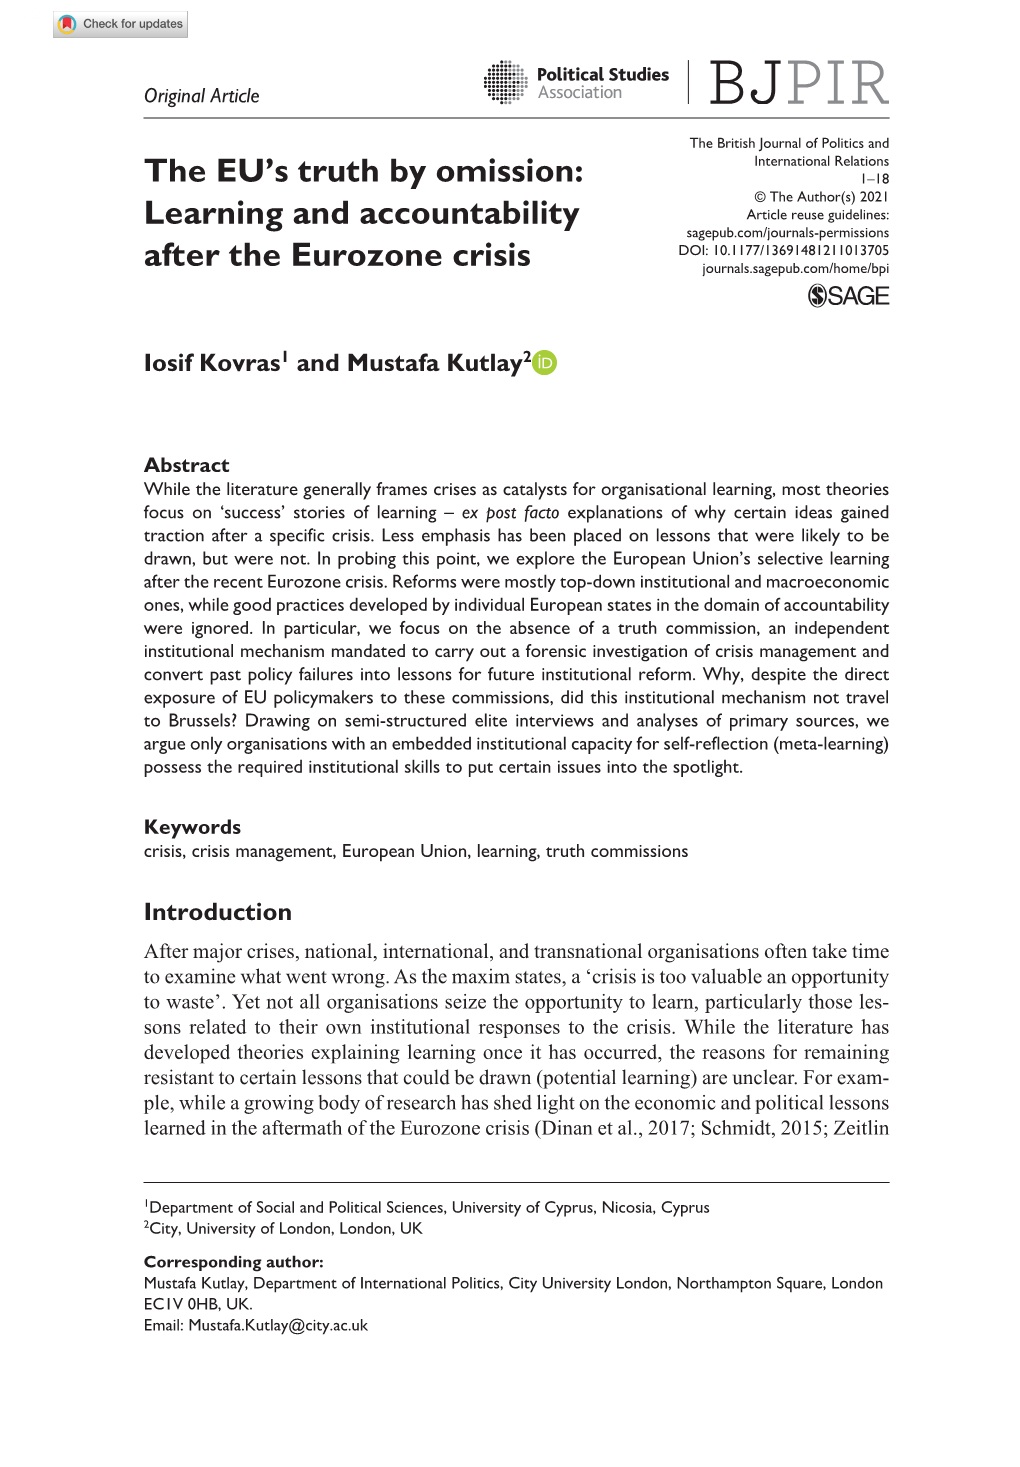 Learning and Accountability After the Eurozone Crisis